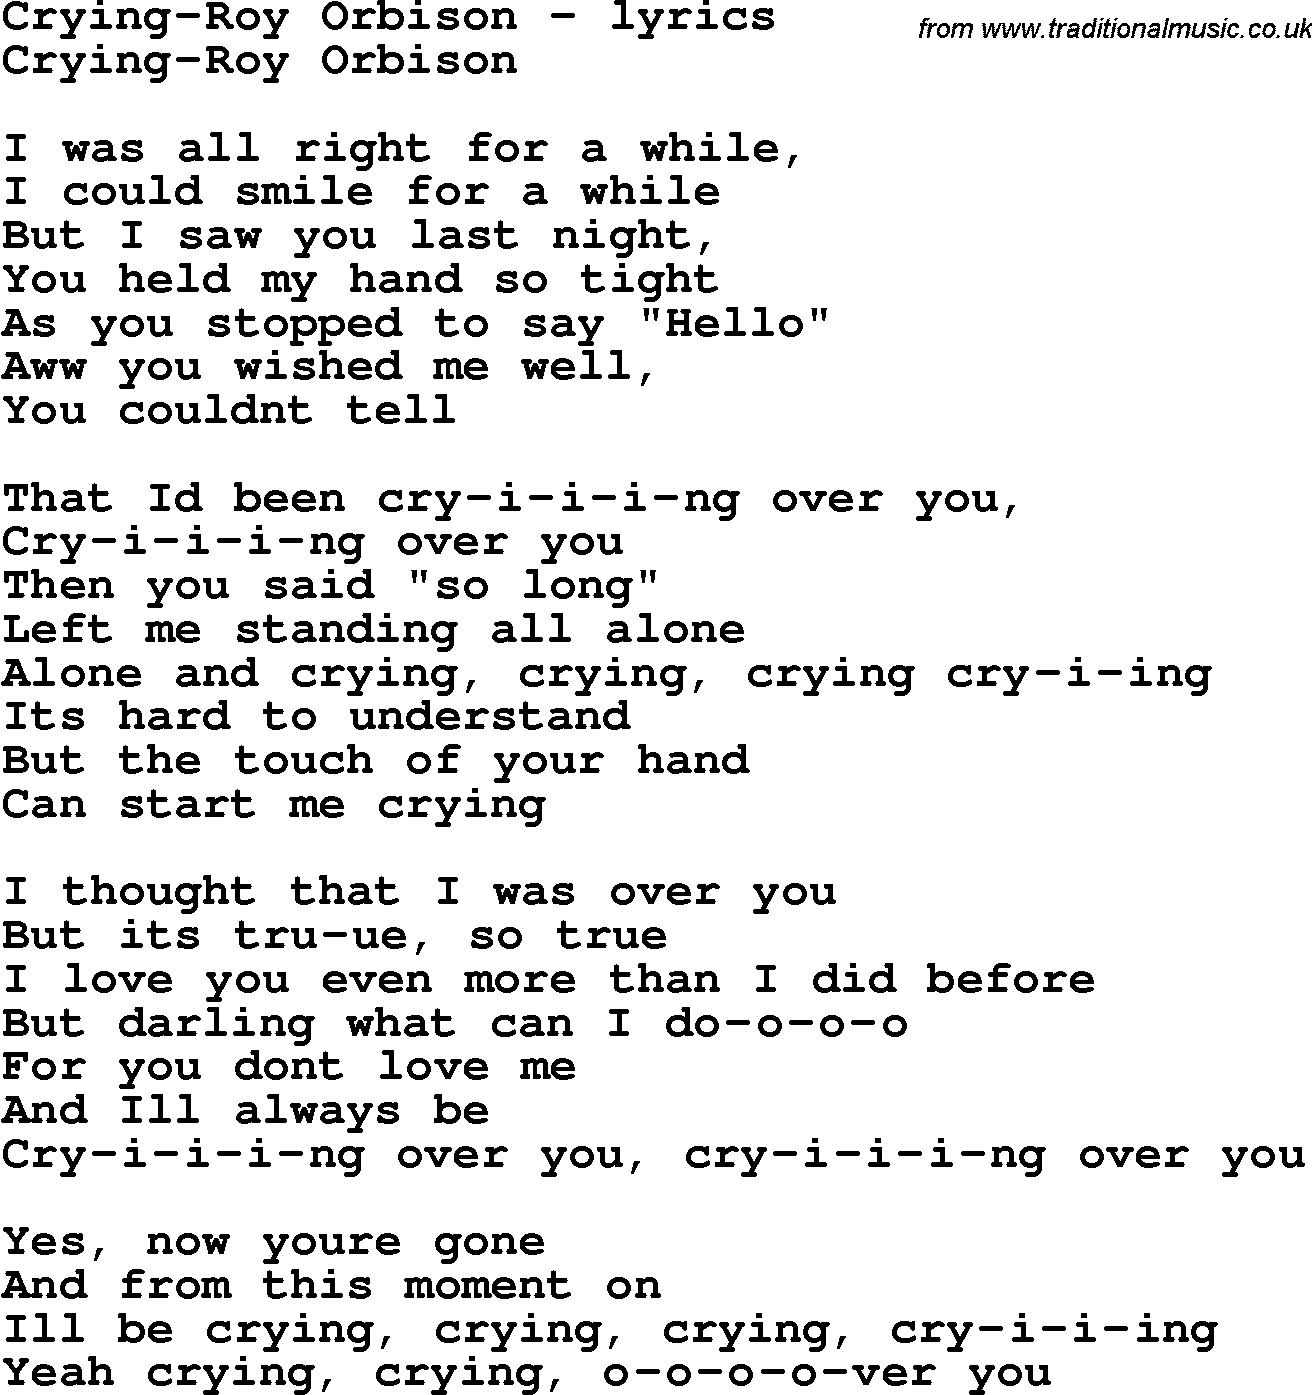 Love Song Lyrics for: Crying-Roy Orbison